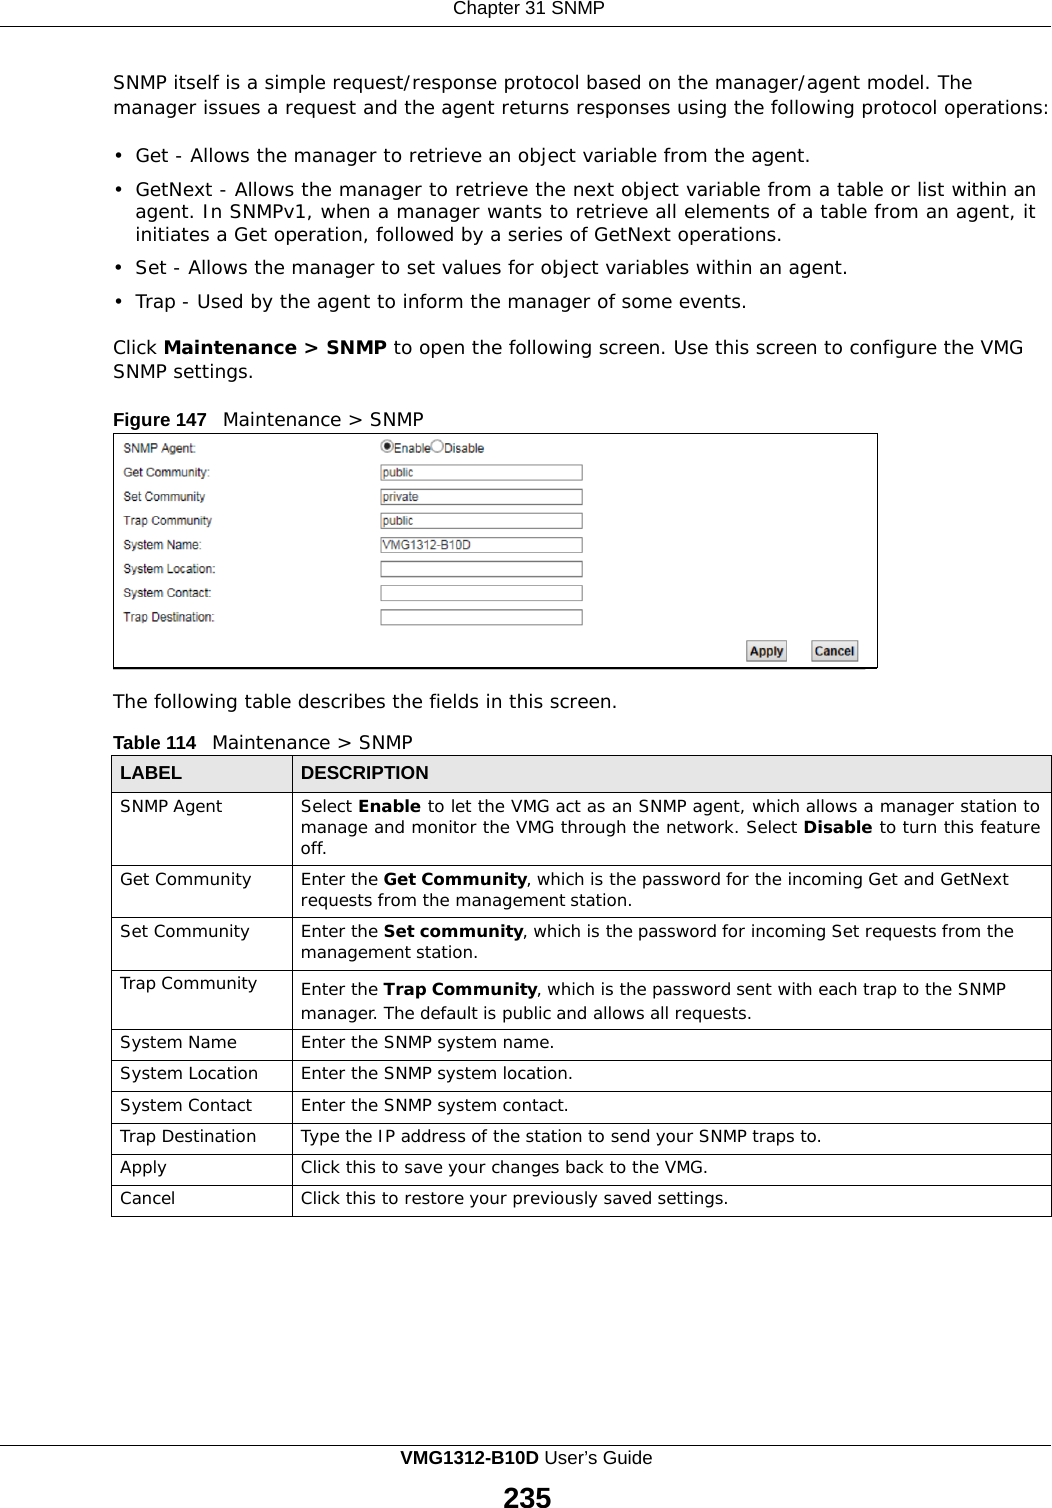    Chapter 31 SNMP   SNMP itself is a simple request/response protocol based on the manager/agent model. The manager issues a request and the agent returns responses using the following protocol operations:  •  Get - Allows the manager to retrieve an object variable from the agent.  •  GetNext - Allows the manager to retrieve the next object variable from a table or list within an agent. In SNMPv1, when a manager wants to retrieve all elements of a table from an agent, it initiates a Get operation, followed by a series of GetNext operations. •  Set - Allows the manager to set values for object variables within an agent.  •  Trap - Used by the agent to inform the manager of some events.  Click Maintenance &gt; SNMP to open the following screen. Use this screen to configure the VMG SNMP settings.  Figure 147   Maintenance &gt; SNMP             The following table describes the fields in this screen.  Table 114   Maintenance &gt; SNMP  LABEL DESCRIPTION SNMP Agent Select Enable to let the VMG act as an SNMP agent, which allows a manager station to manage and monitor the VMG through the network. Select Disable to turn this feature off. Get Community Enter the Get Community, which is the password for the incoming Get and GetNext requests from the management station. Set Community Enter the Set community, which is the password for incoming Set requests from the management station. Trap Community Enter the Trap Community, which is the password sent with each trap to the SNMP manager. The default is public and allows all requests. System Name Enter the SNMP system name. System Location Enter the SNMP system location. System Contact Enter the SNMP system contact. Trap Destination Type the IP address of the station to send your SNMP traps to. Apply Click this to save your changes back to the VMG. Cancel Click this to restore your previously saved settings. VMG1312-B10D User’s Guide  235  